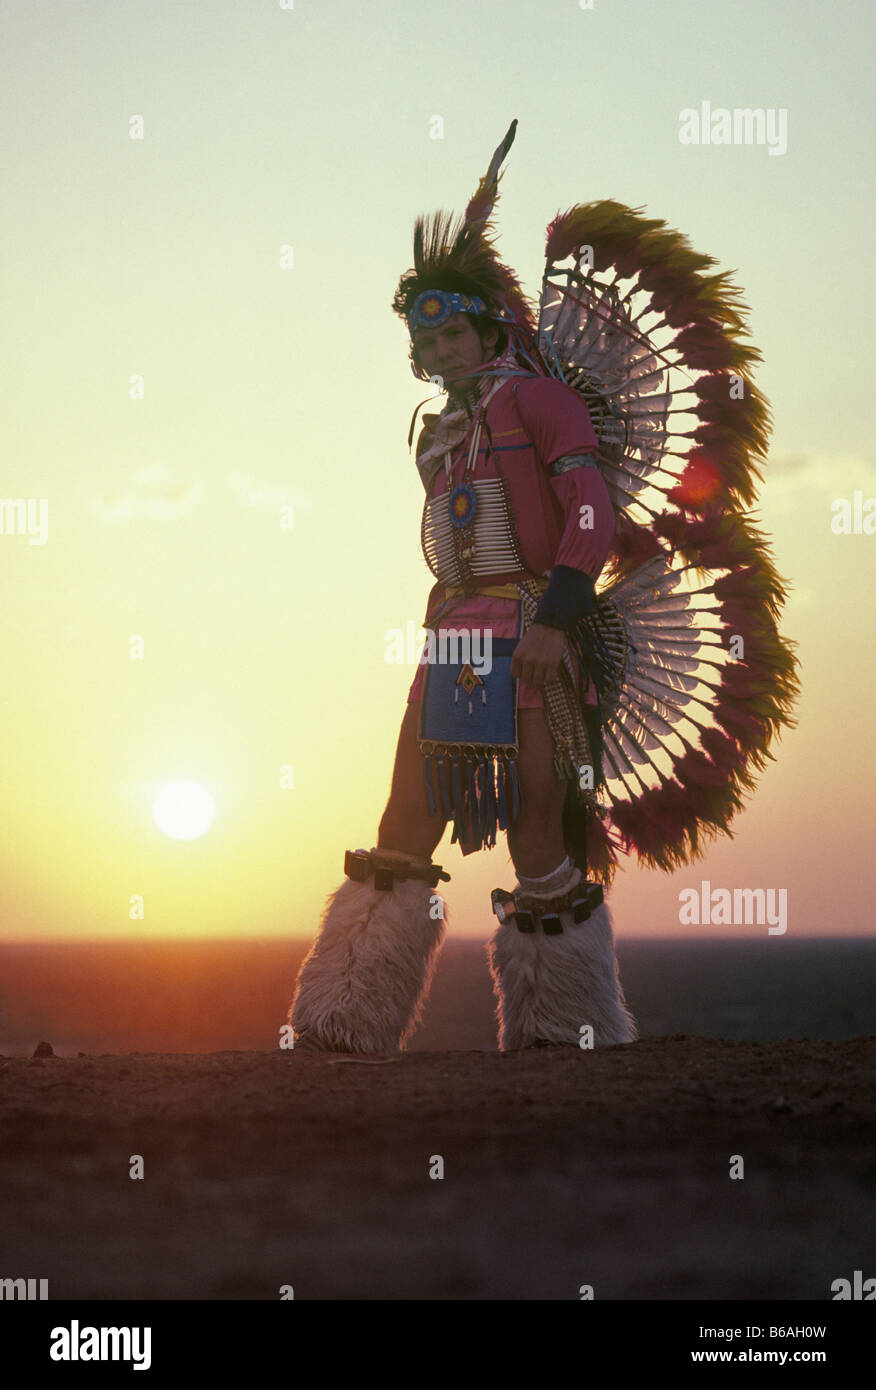 A young Comanche Indian dancer at sunset wearing eagle feathers in his costume Stock Photo